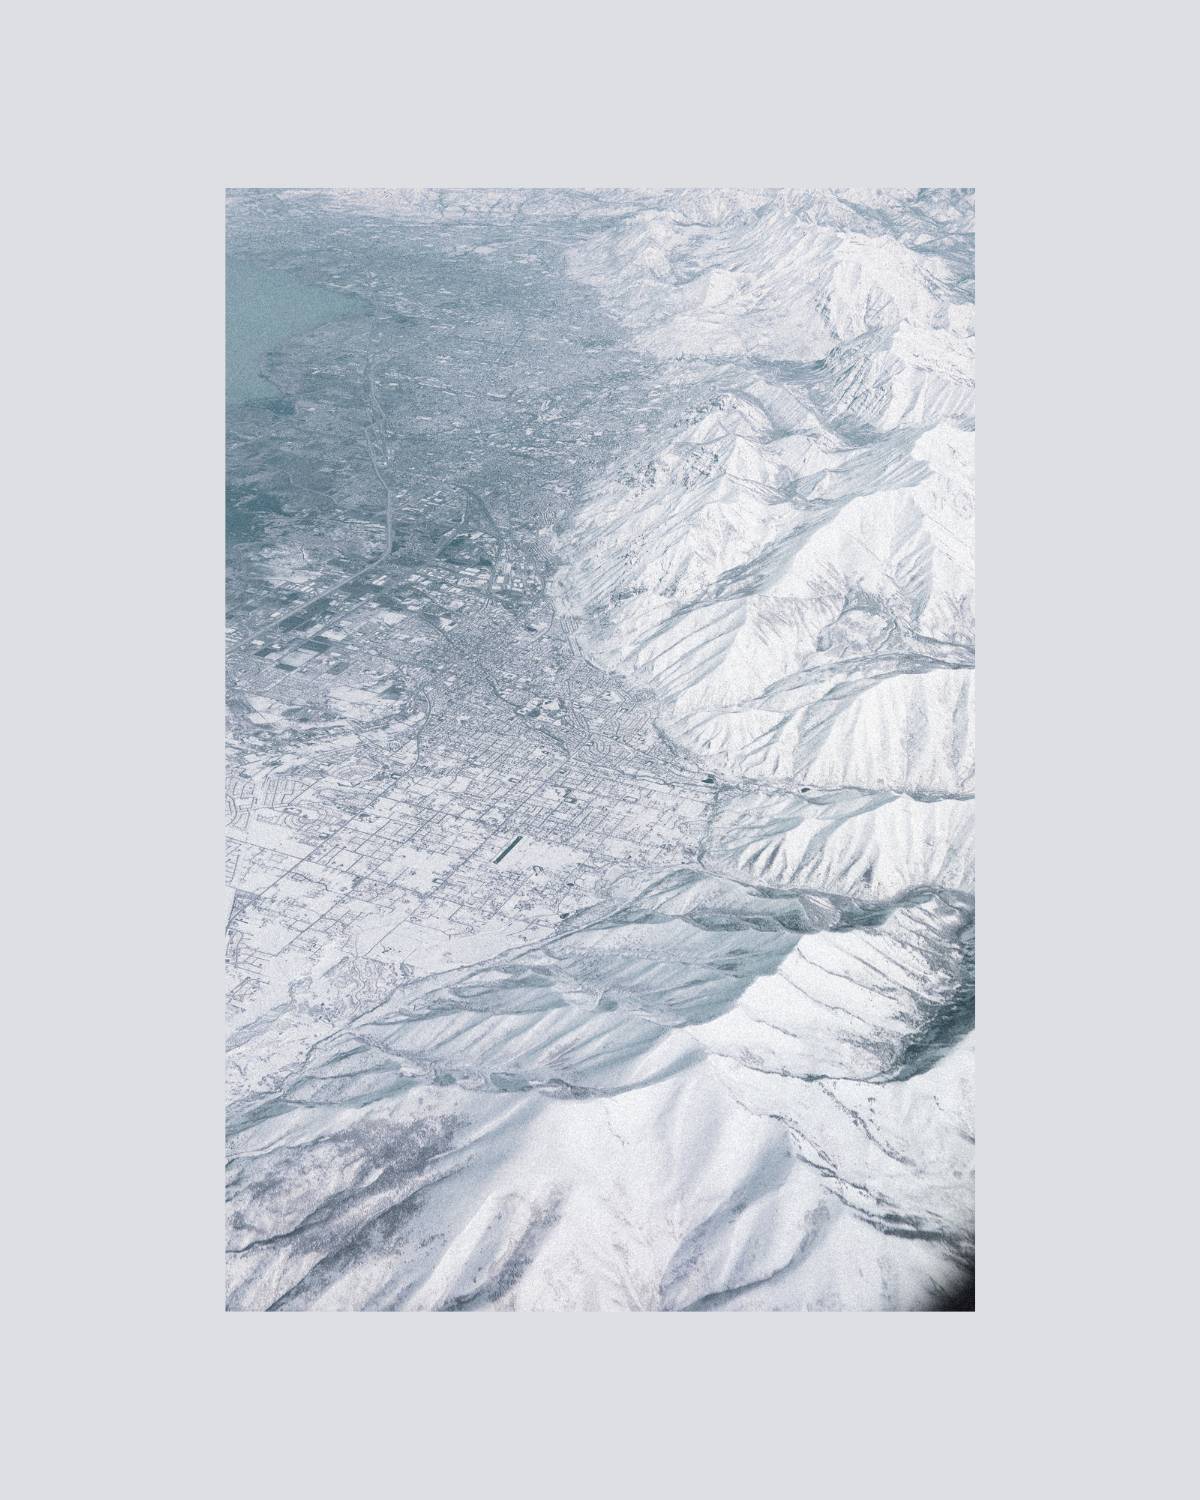 Provo, Utah and the Wasatch Range of the Rocky Mountain Wolfgang Tillmans